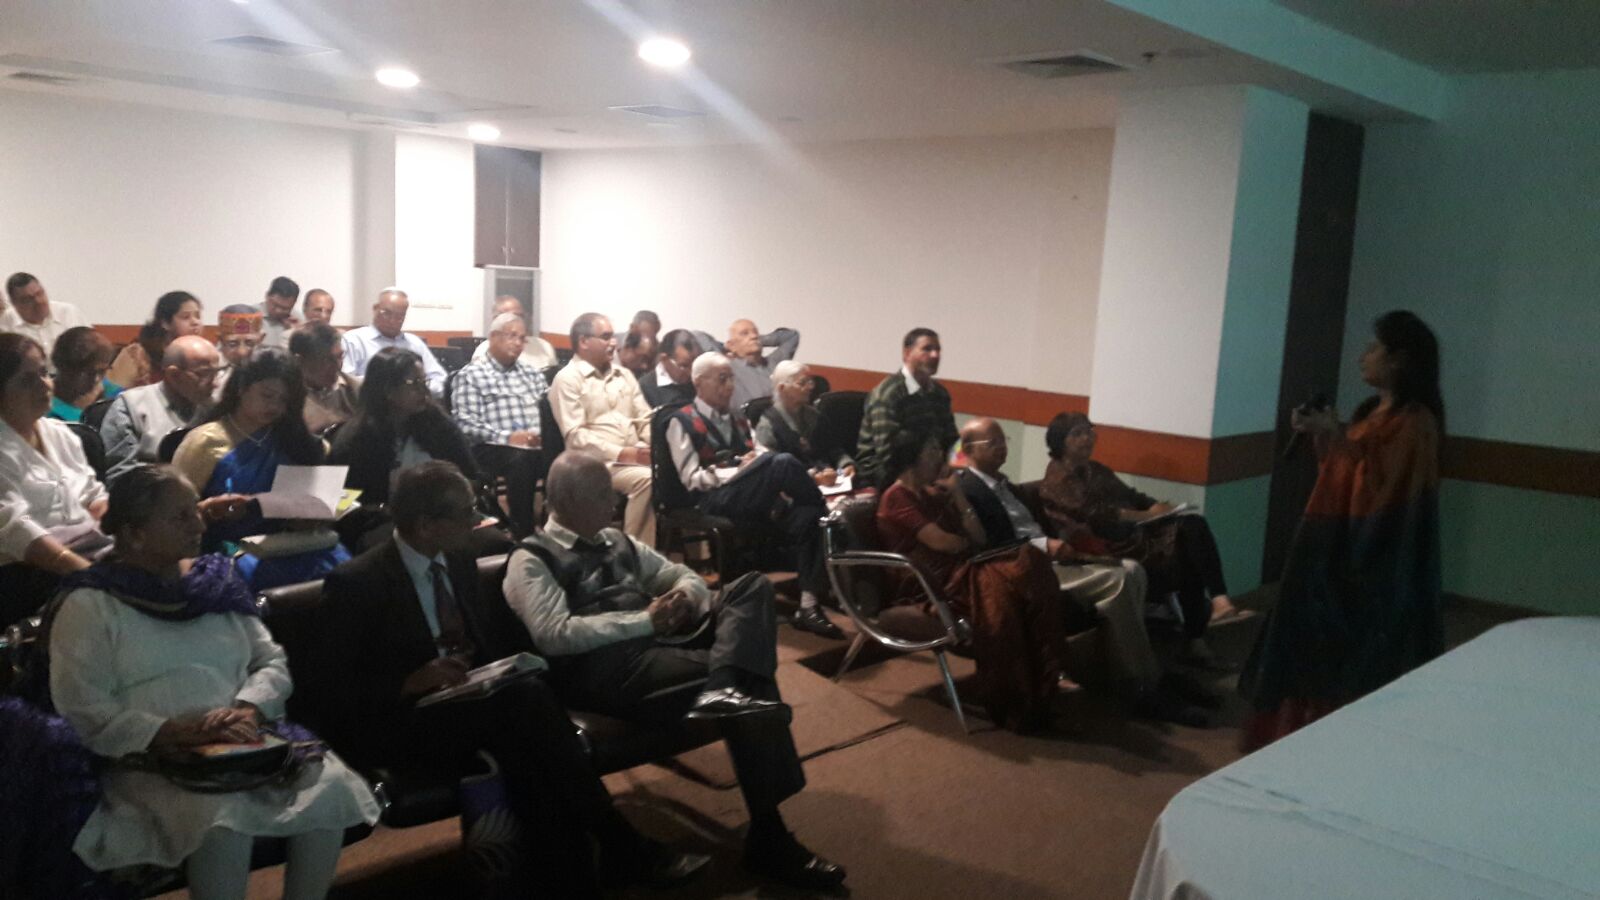 Paras Hospitals, Gurgaon conducts ‘Coffee with Diabetologist’ Session on defeat diabetes with lifestyle modifications